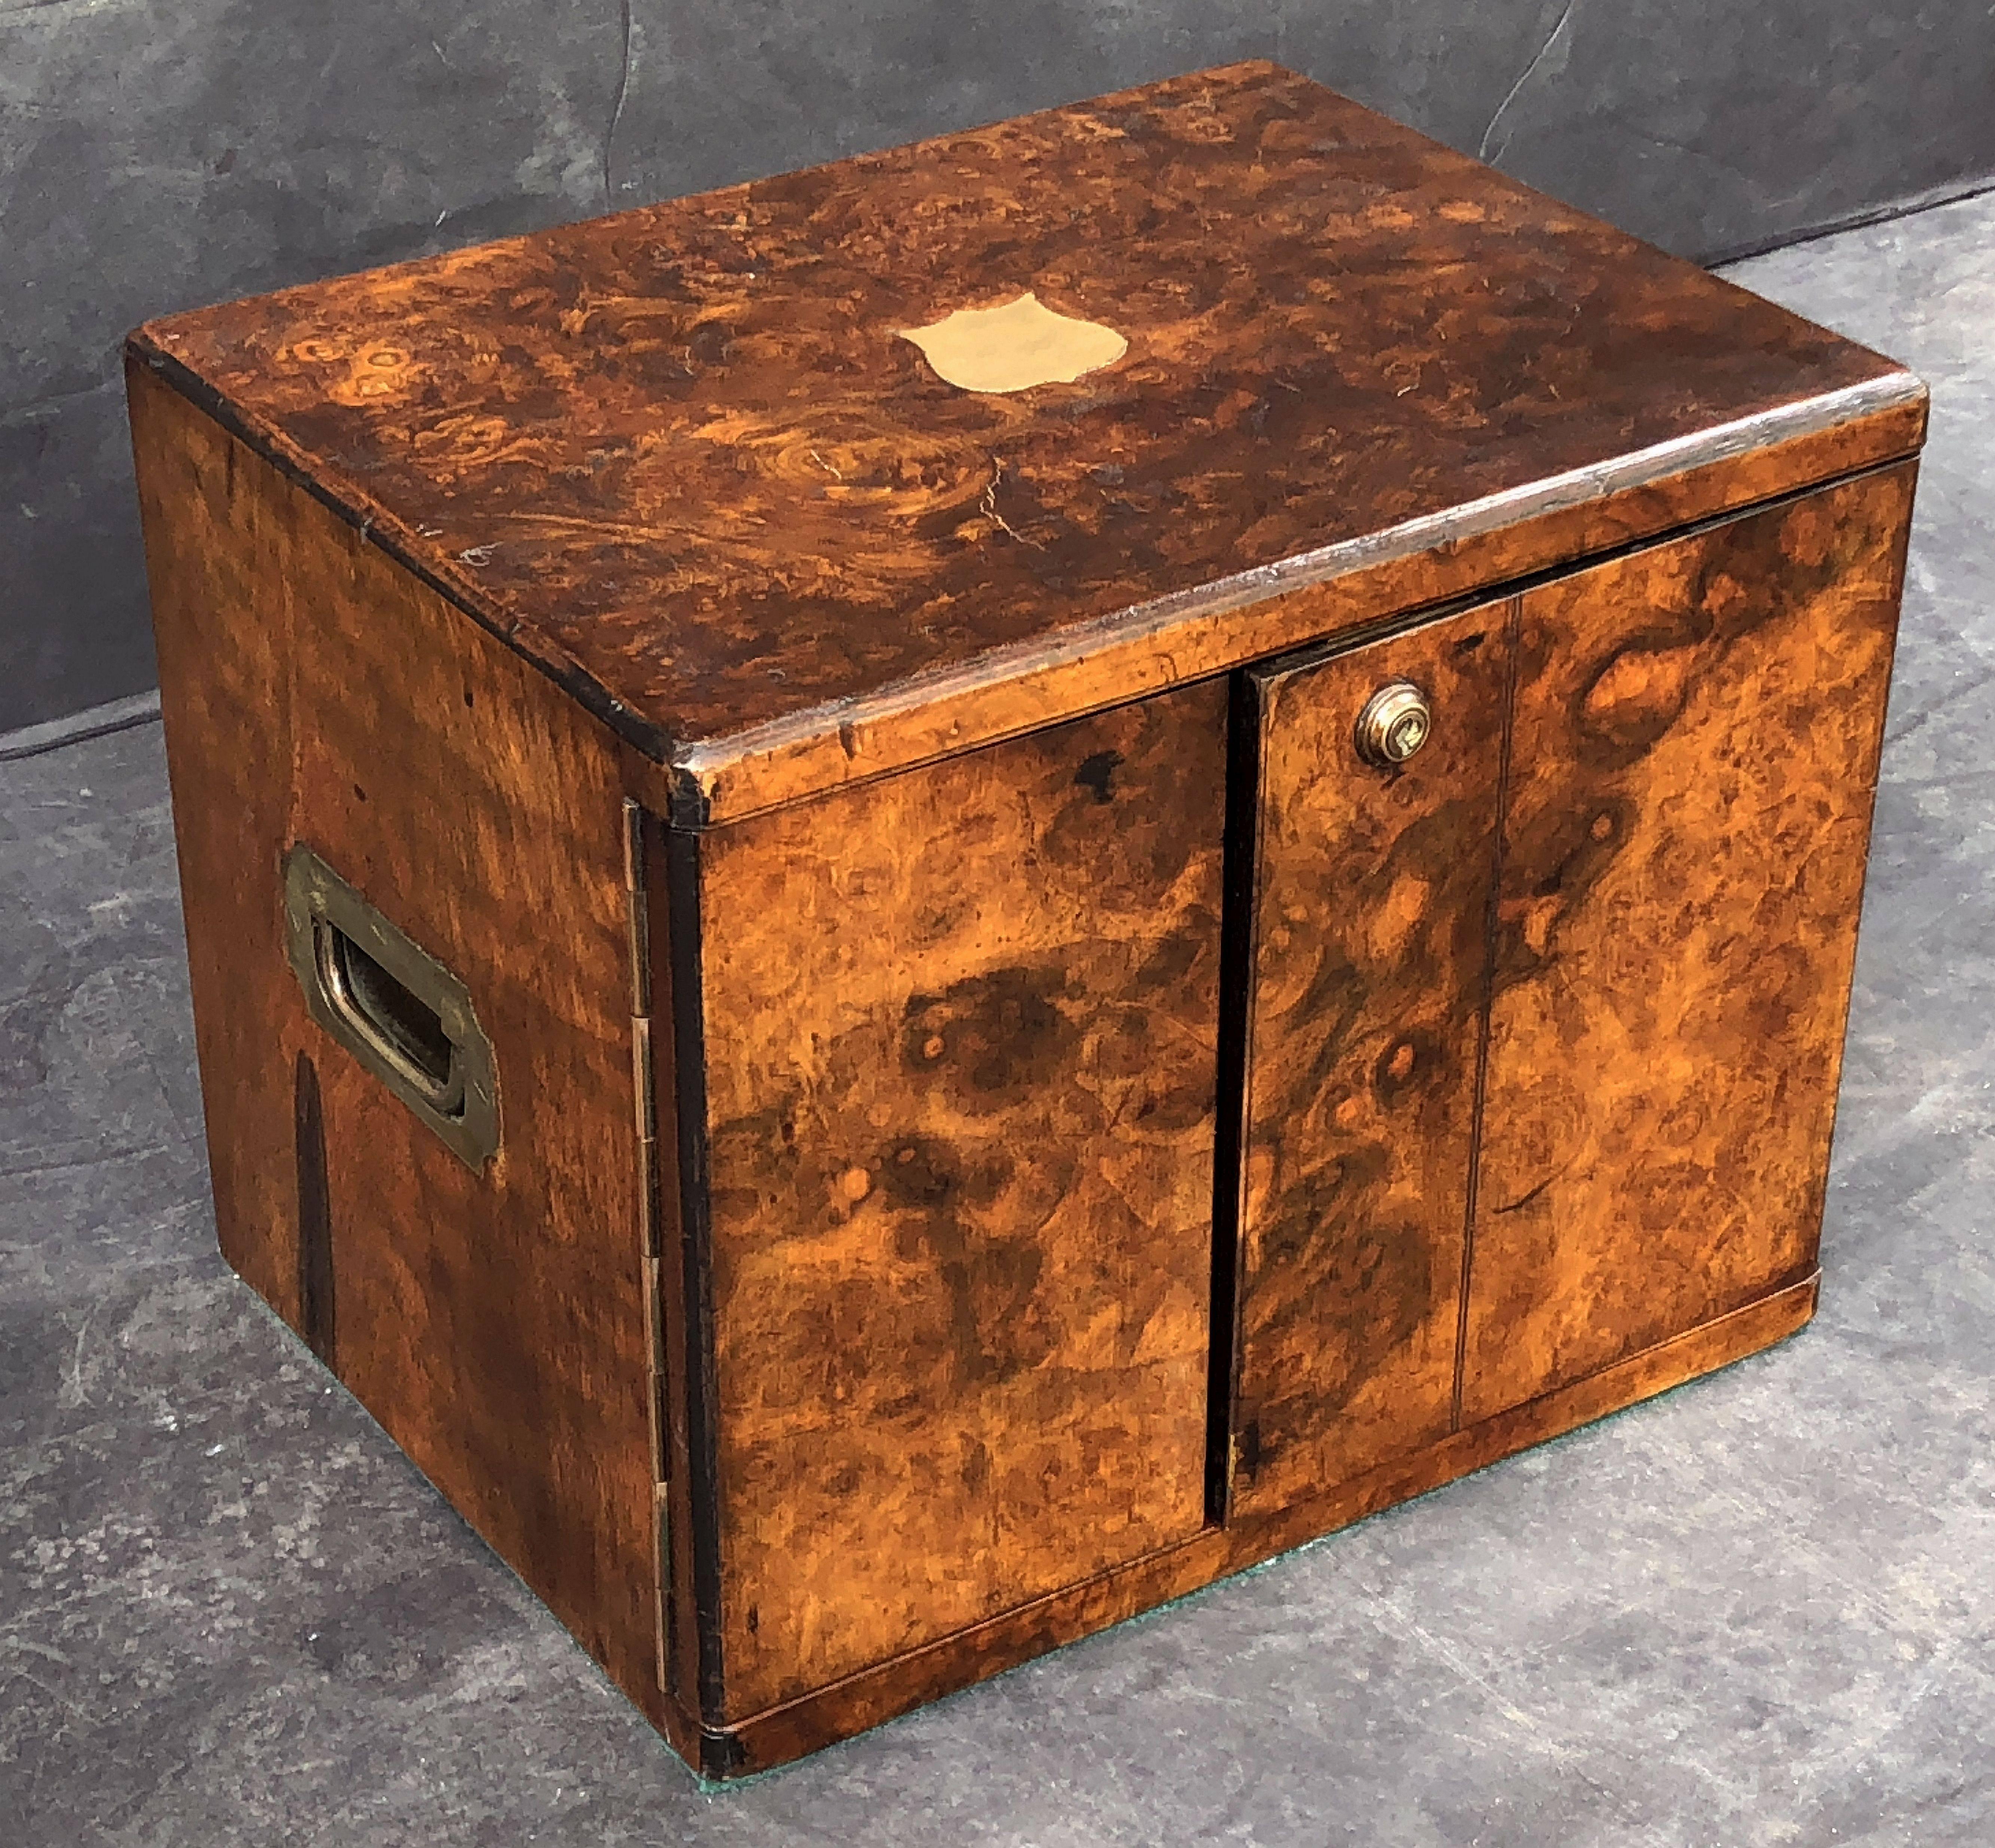 A fine English collector's cabinet box of brass-bound burr walnut, featuring a moulded top with brass chevron inlay to the center, over two small cabinet doors, opening to two drawers with recessed brass hardware. The exterior with figured wood all